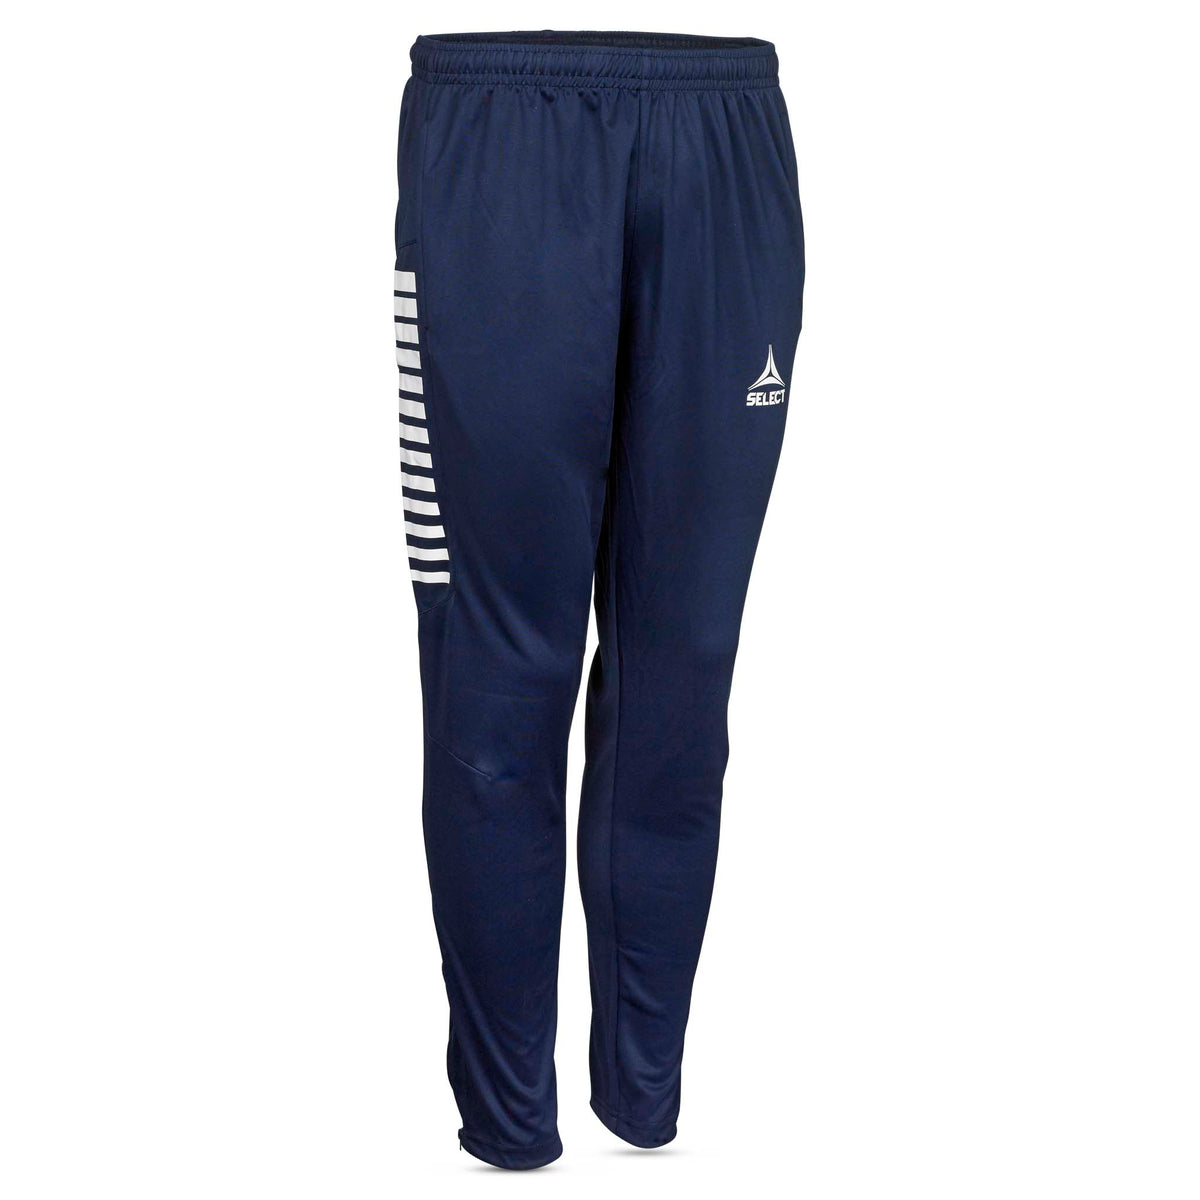 Valiente Carvico Artica stretch pants thermal in navy buy online - Golf  House